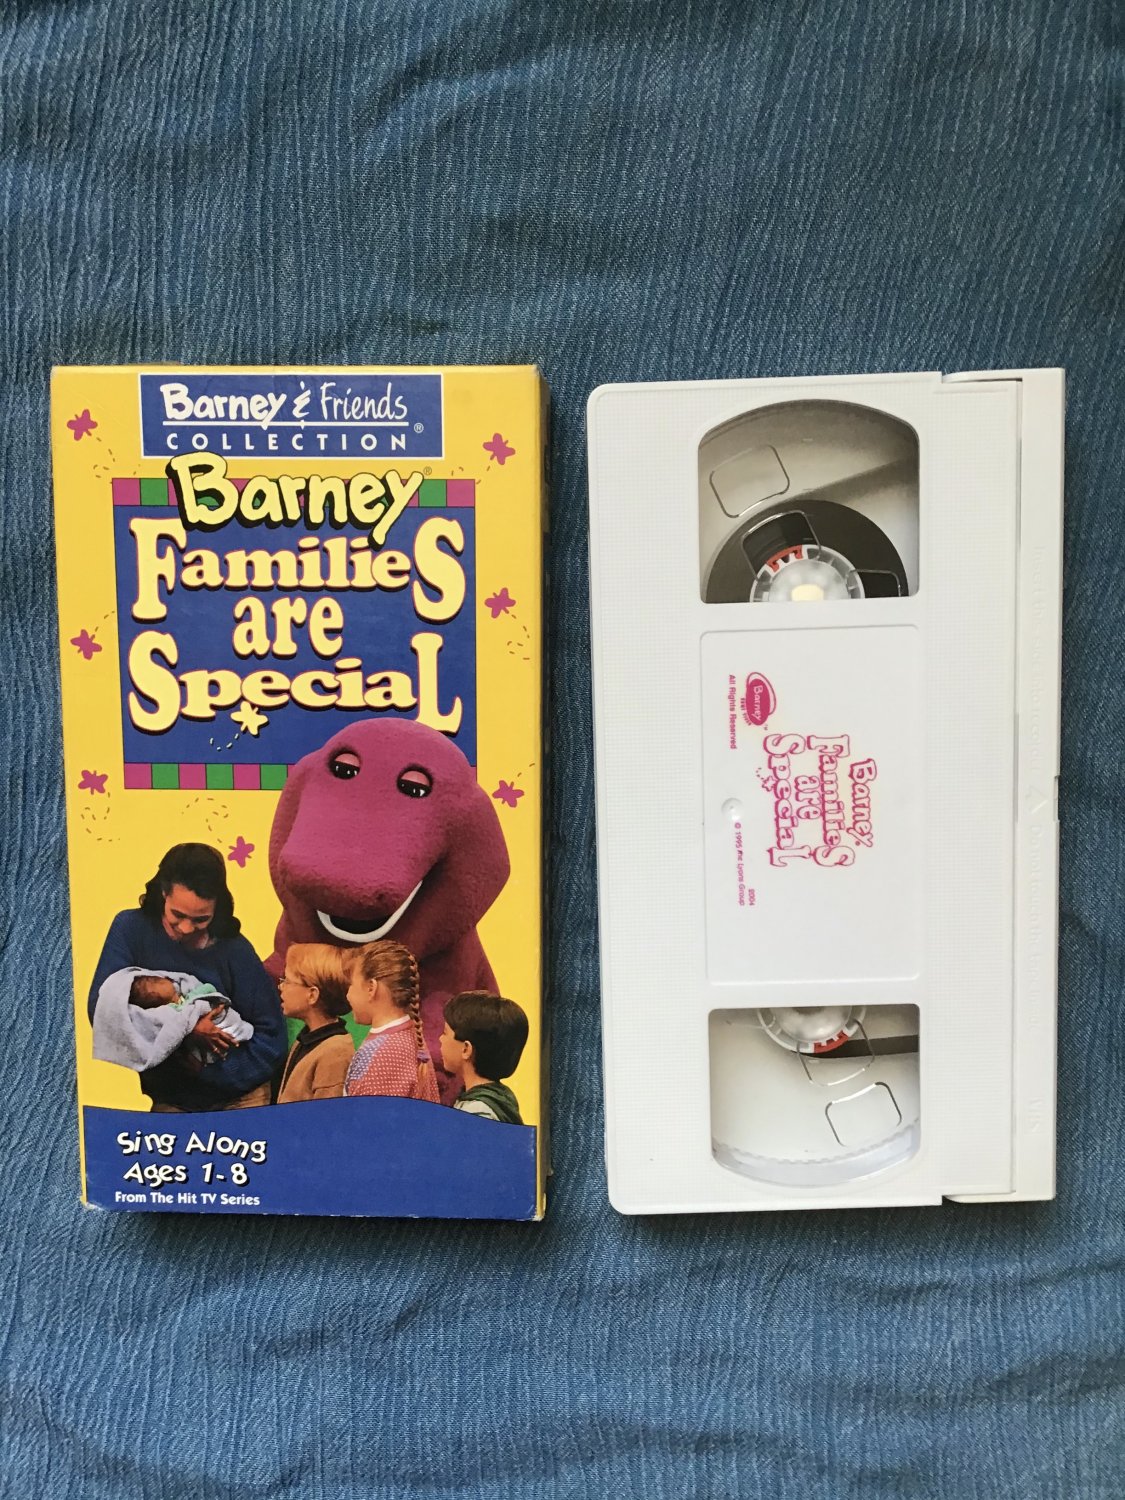 Barney & Friends Barney Families Are Special Vhs